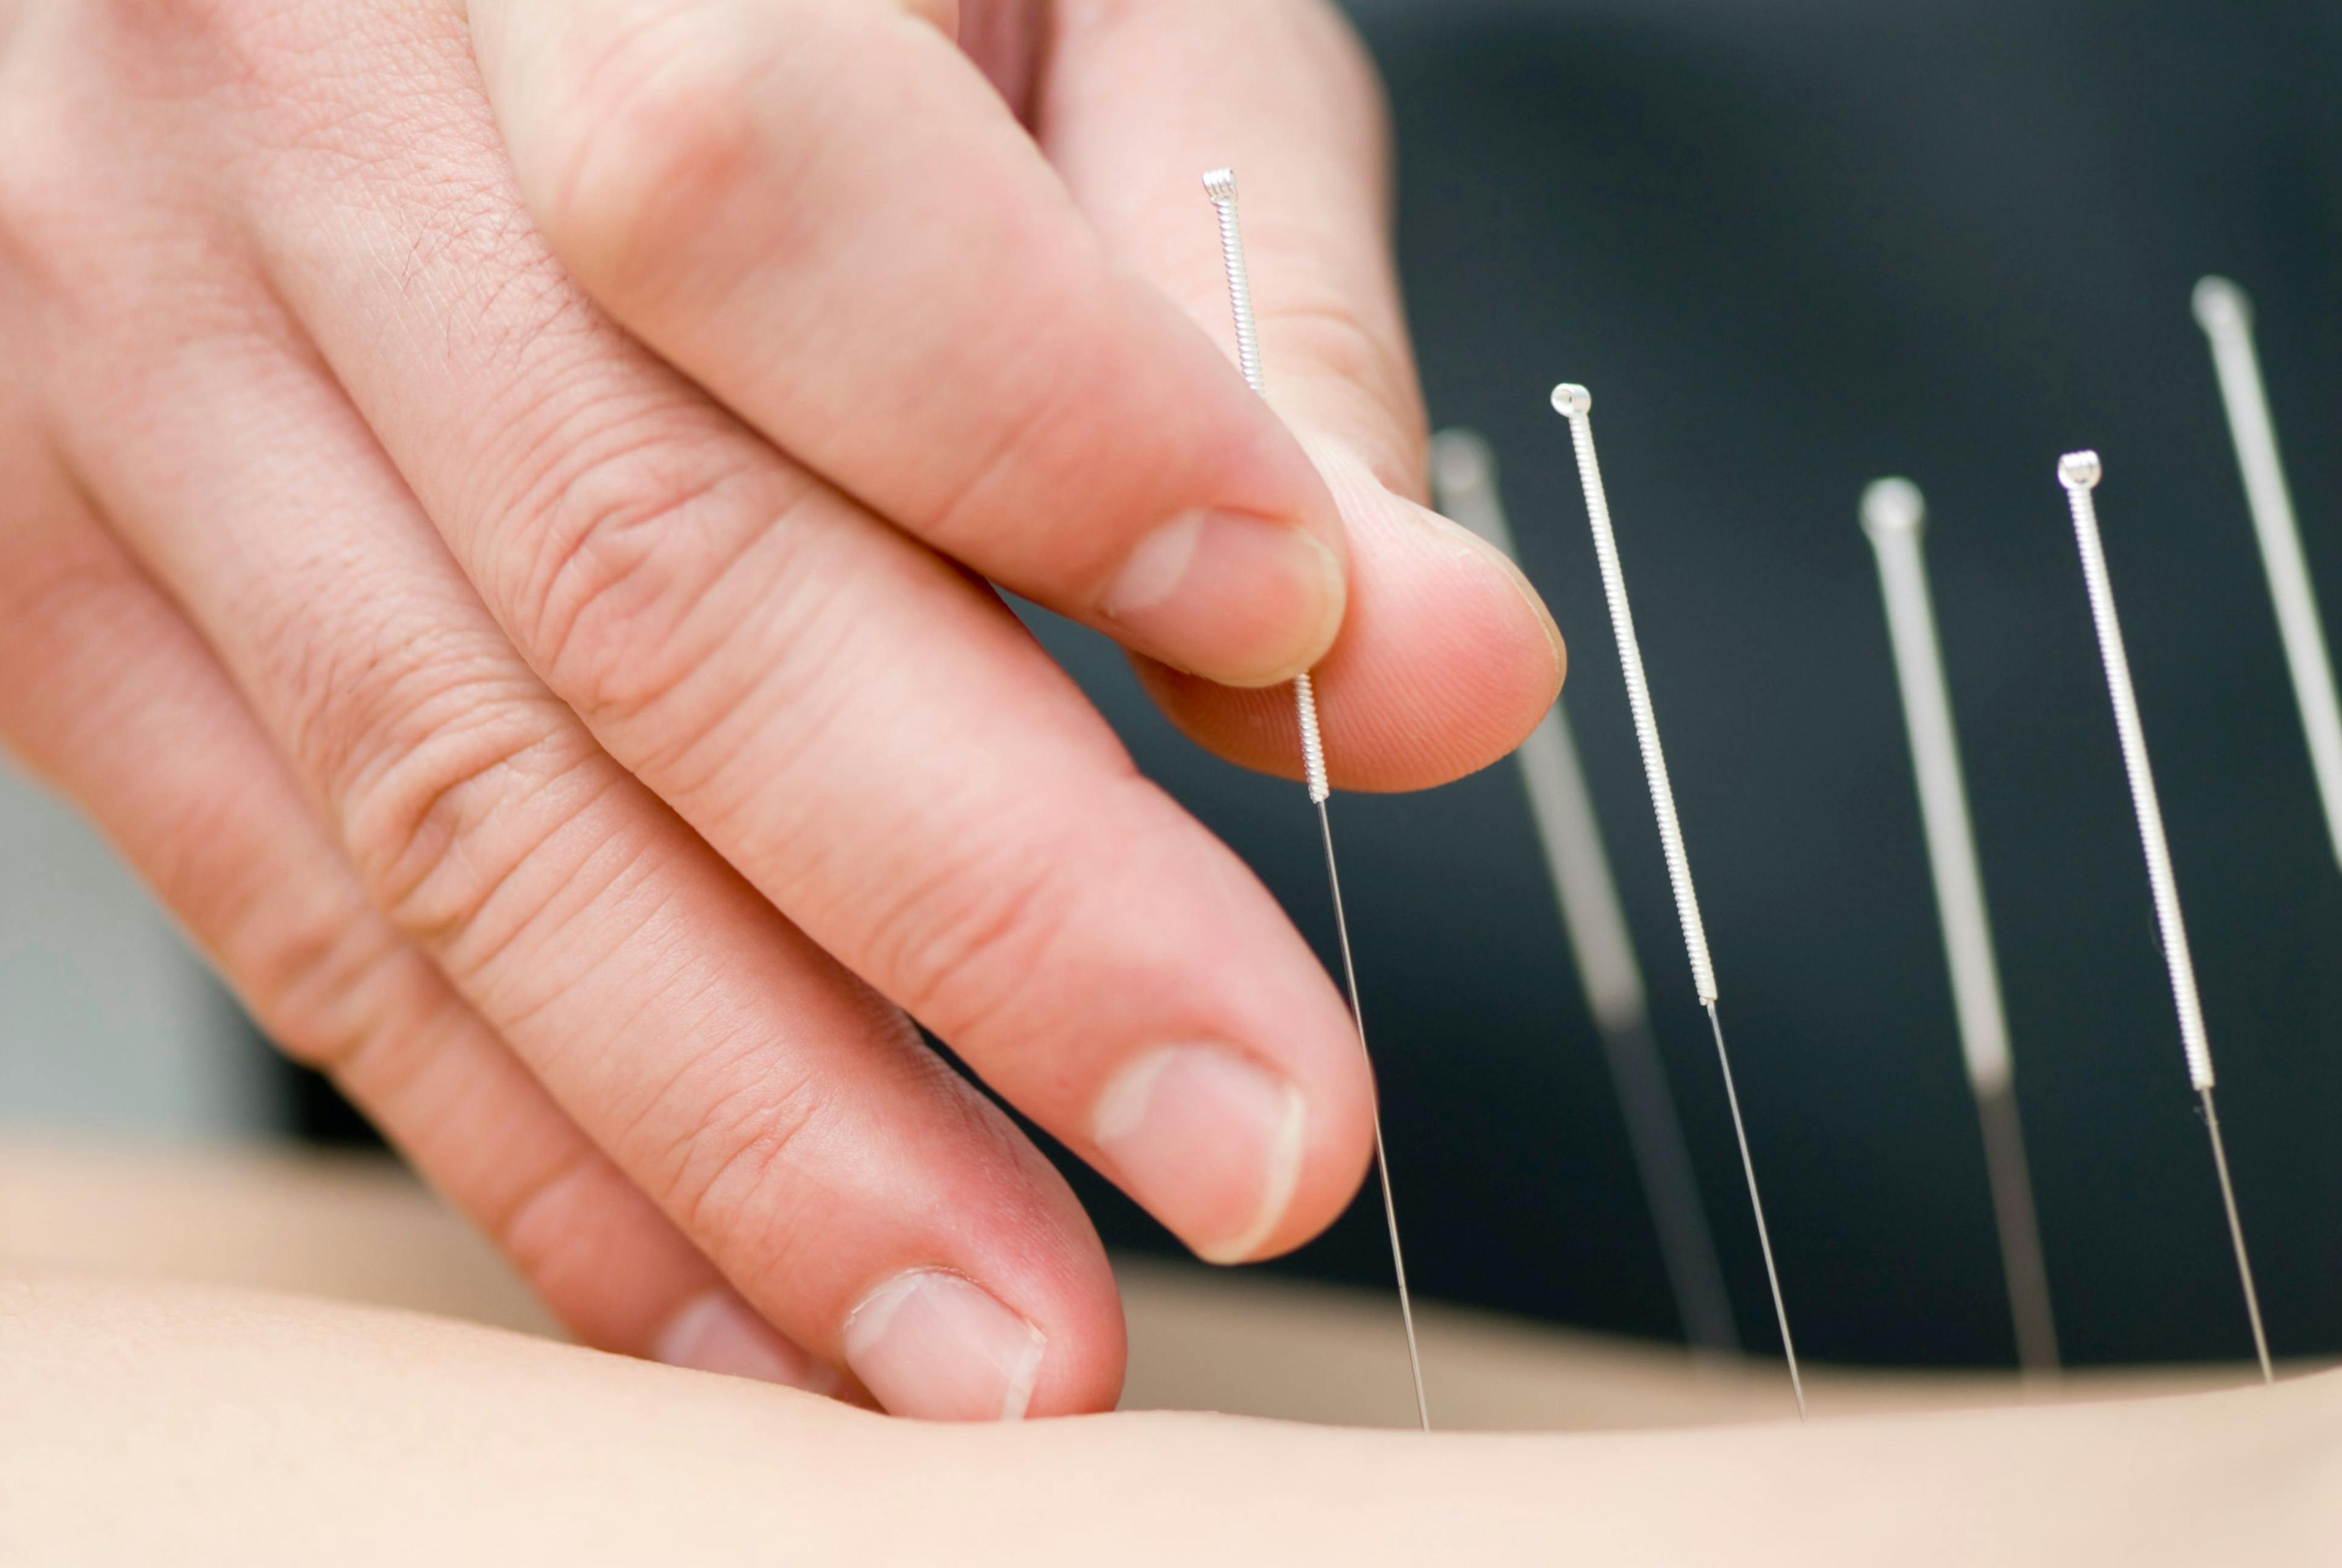 Acupuncture for pelvic floor disorders: Is it effective?